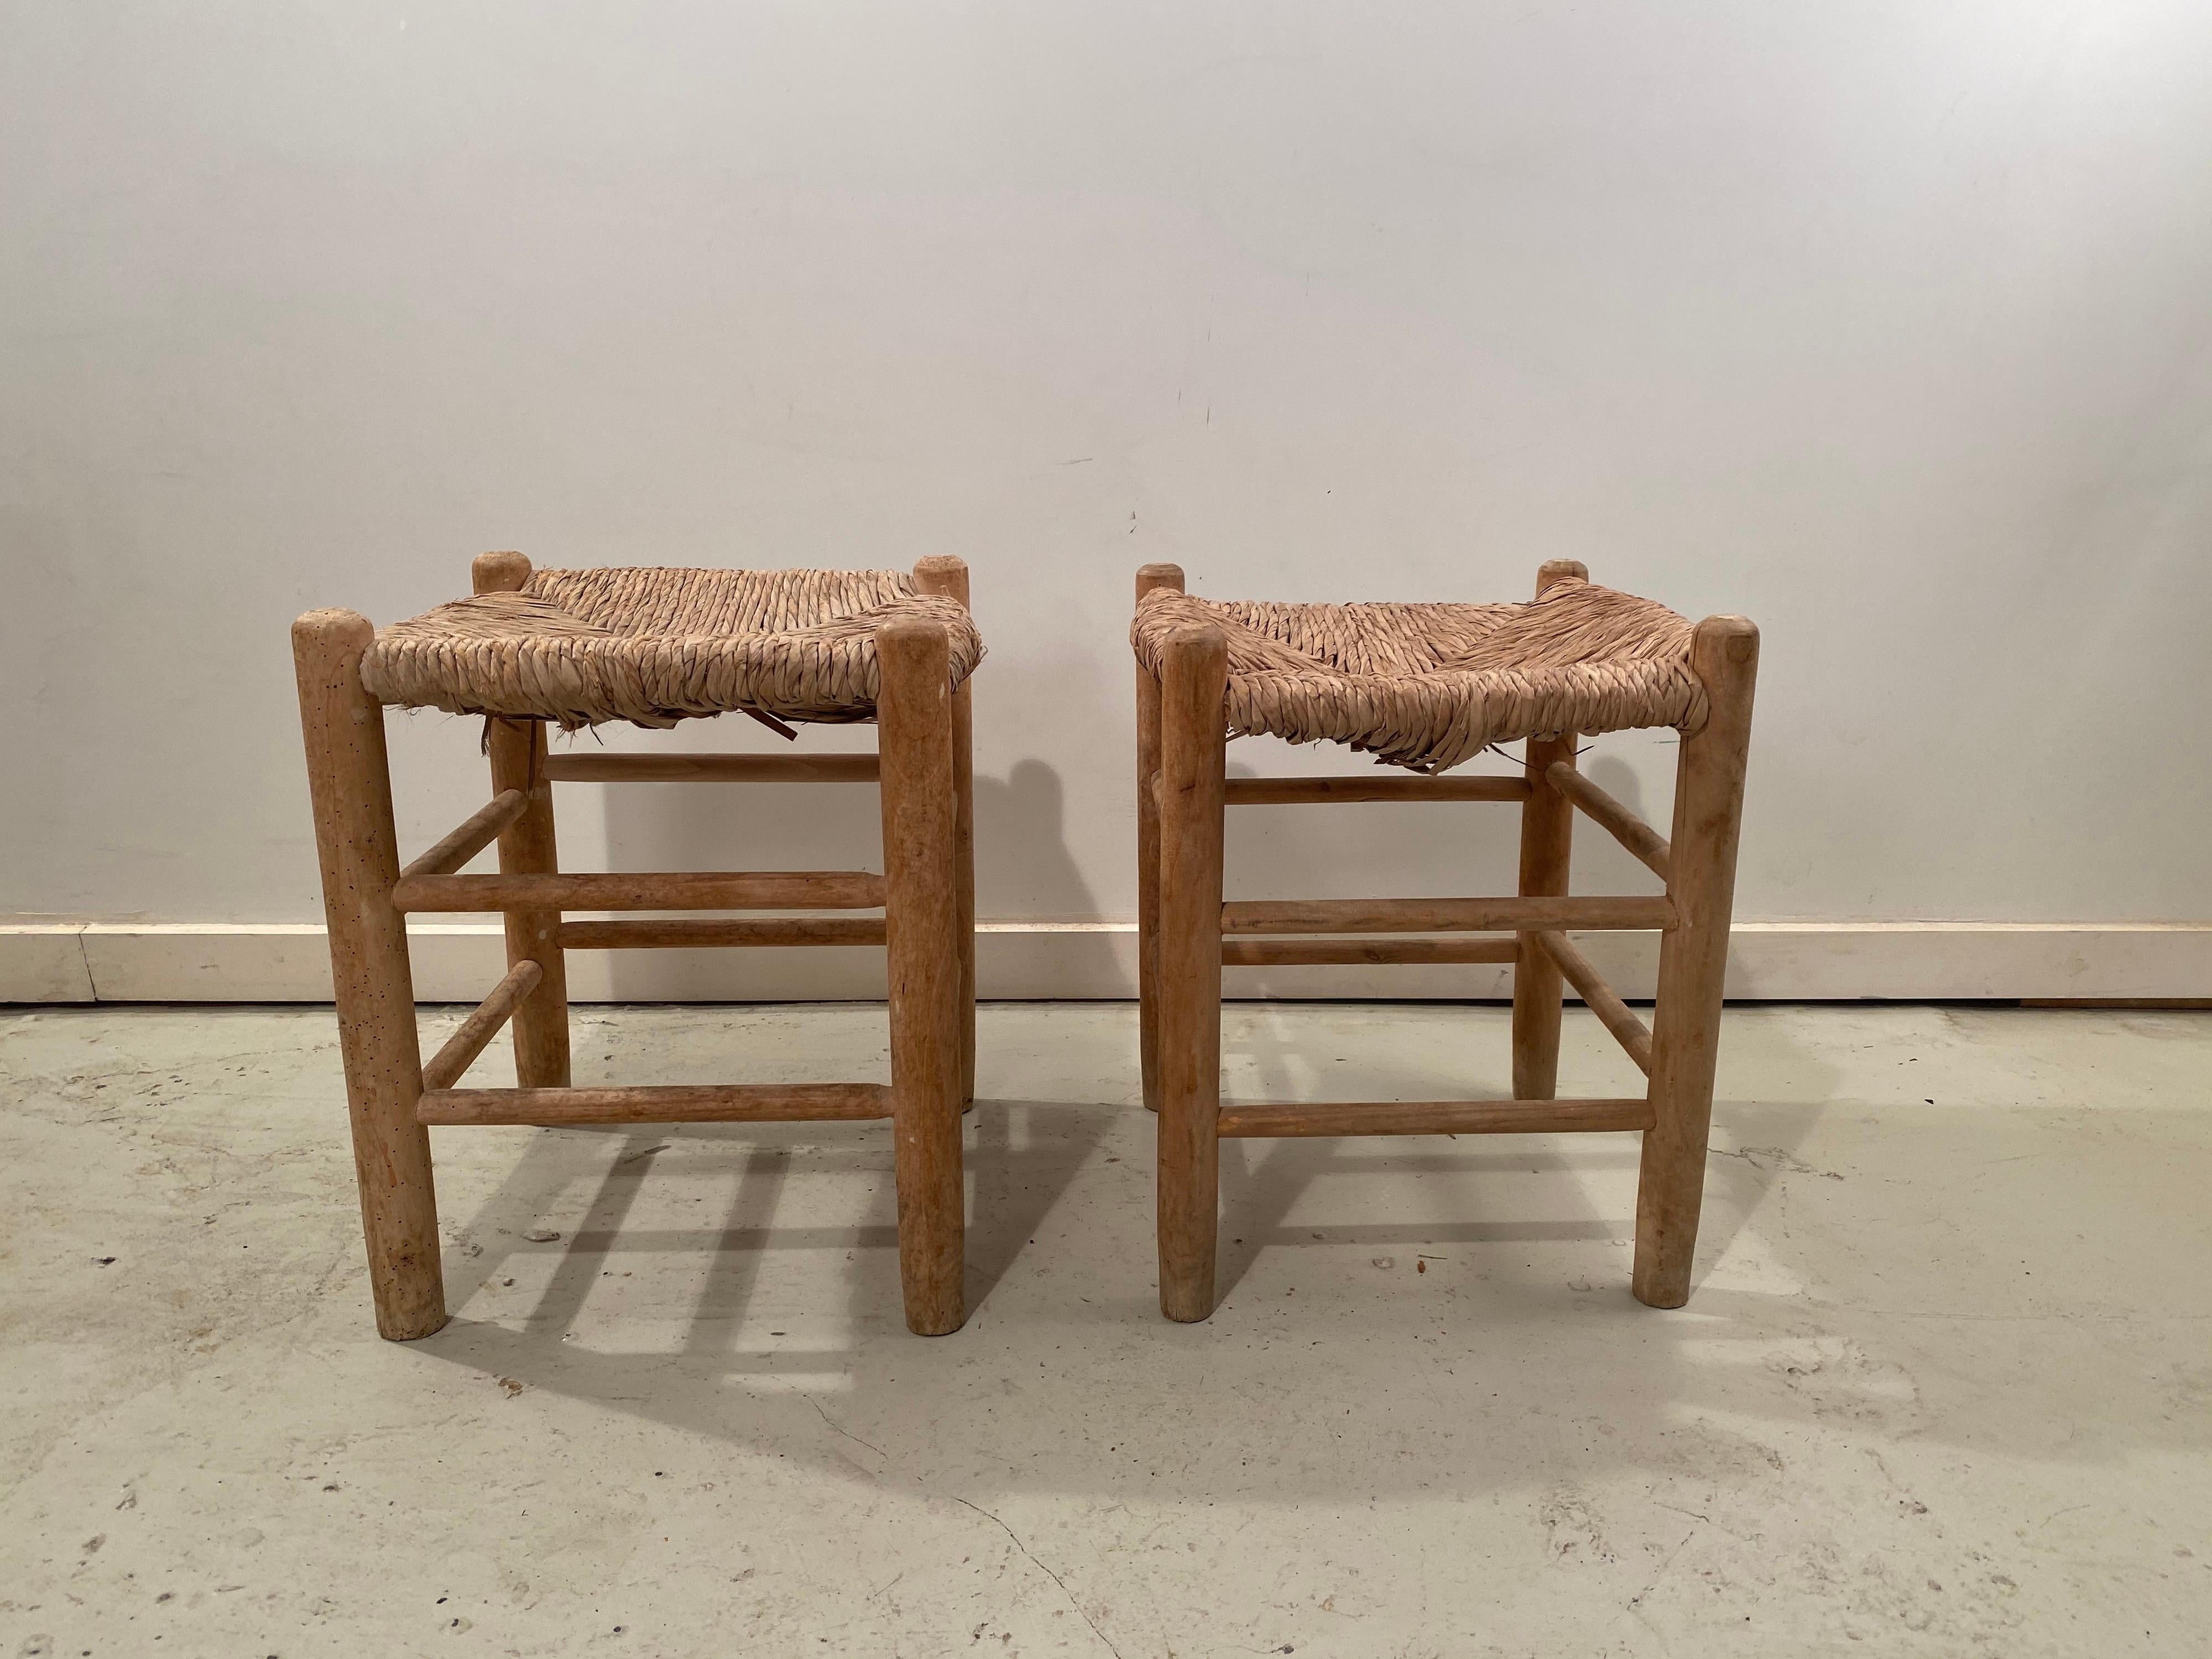 Beautiful pair of wicker Dordogne Charlotte Perriand side stools for Sentou. The wicker is in good condition and the ash wood frame of the stools have the characteristic for Charlotte Perriand pale matt finish.